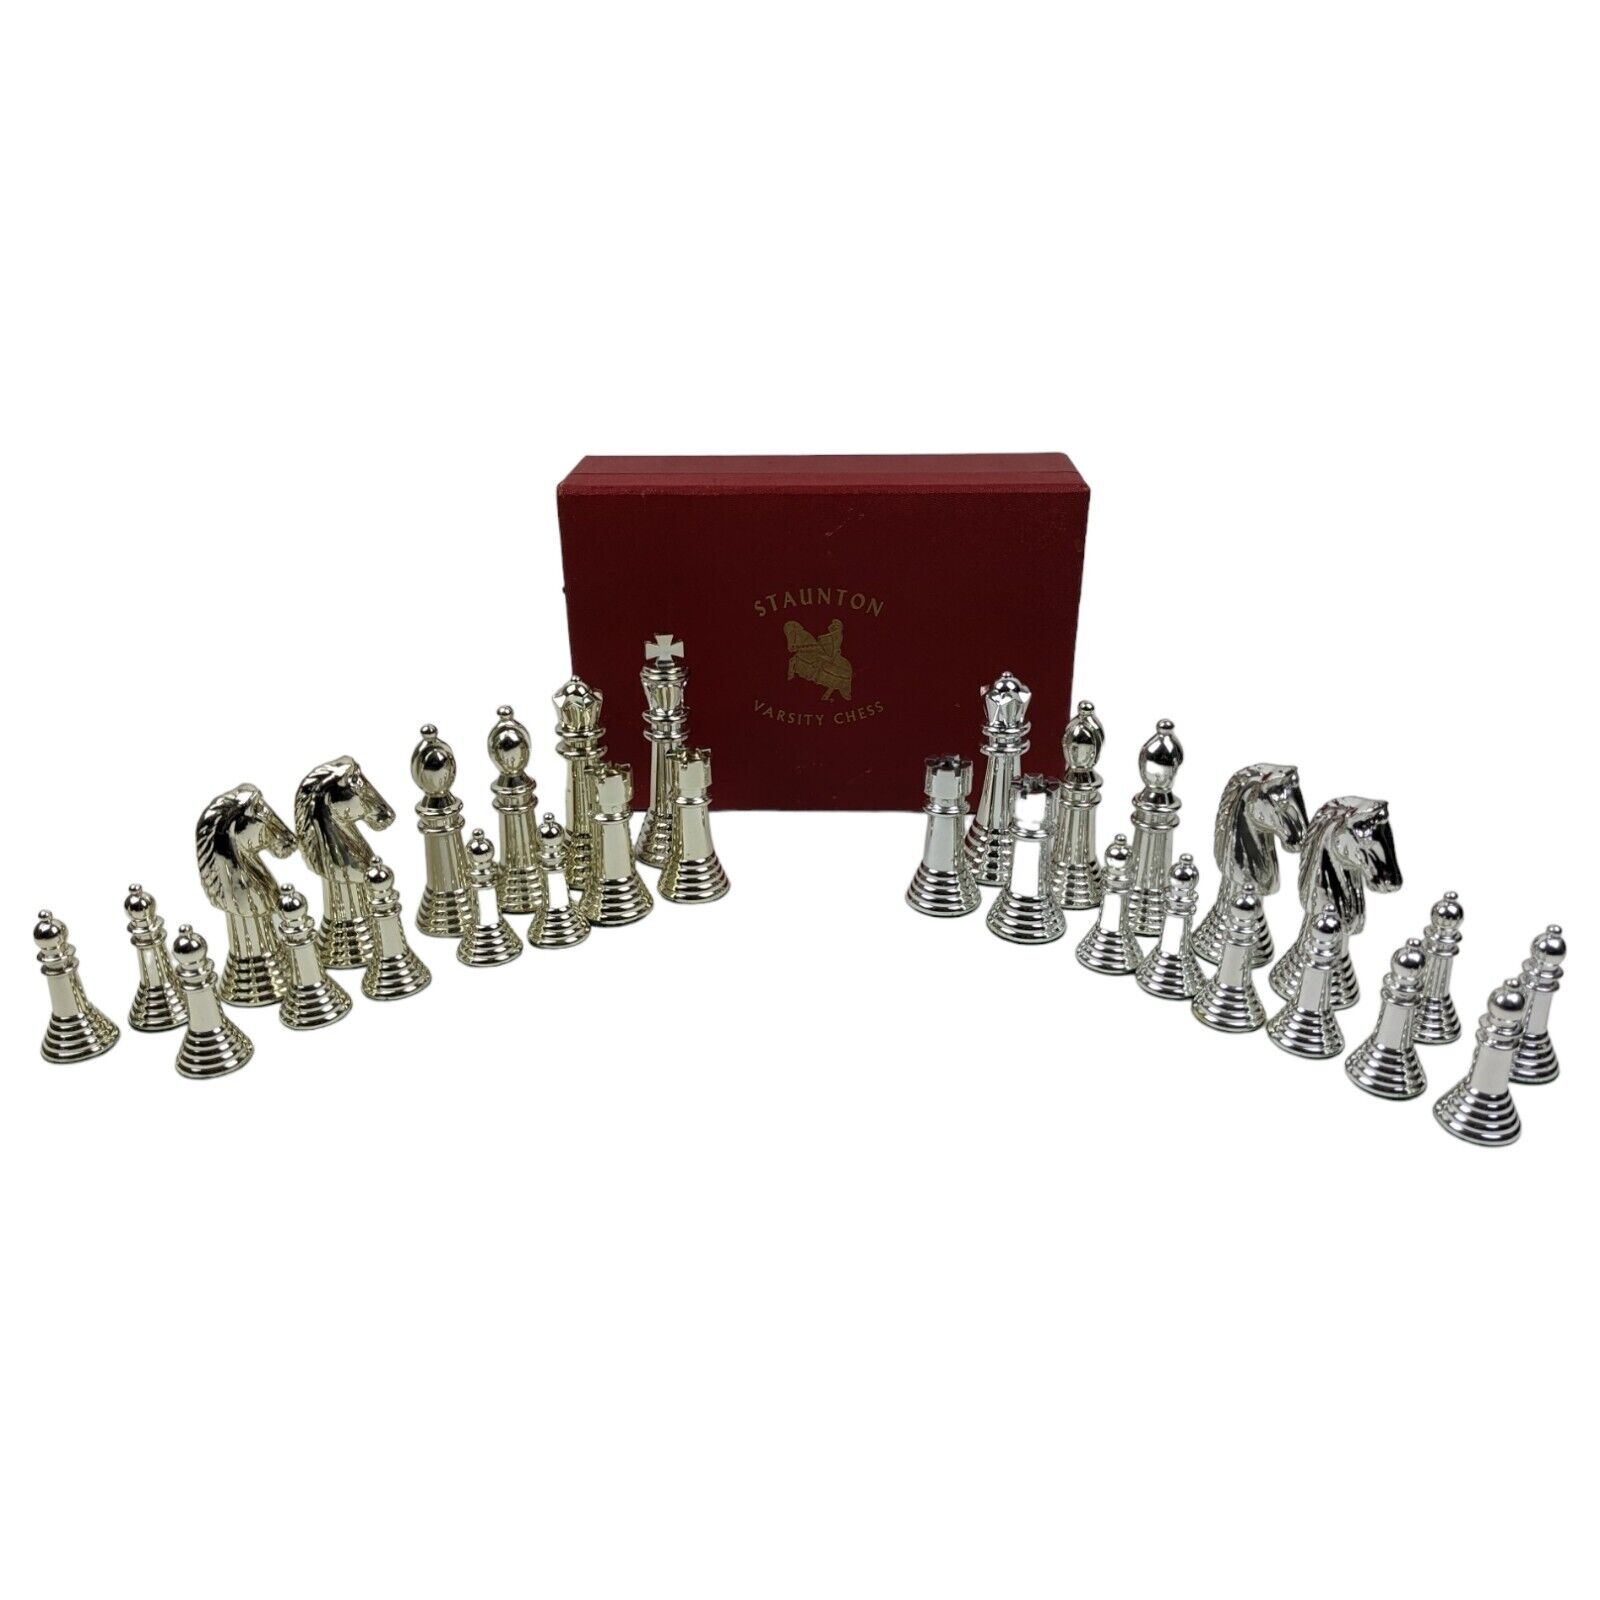 Vintage Staunton Varsity Chess Set / Pieces In Leatherette Wood Box *READ